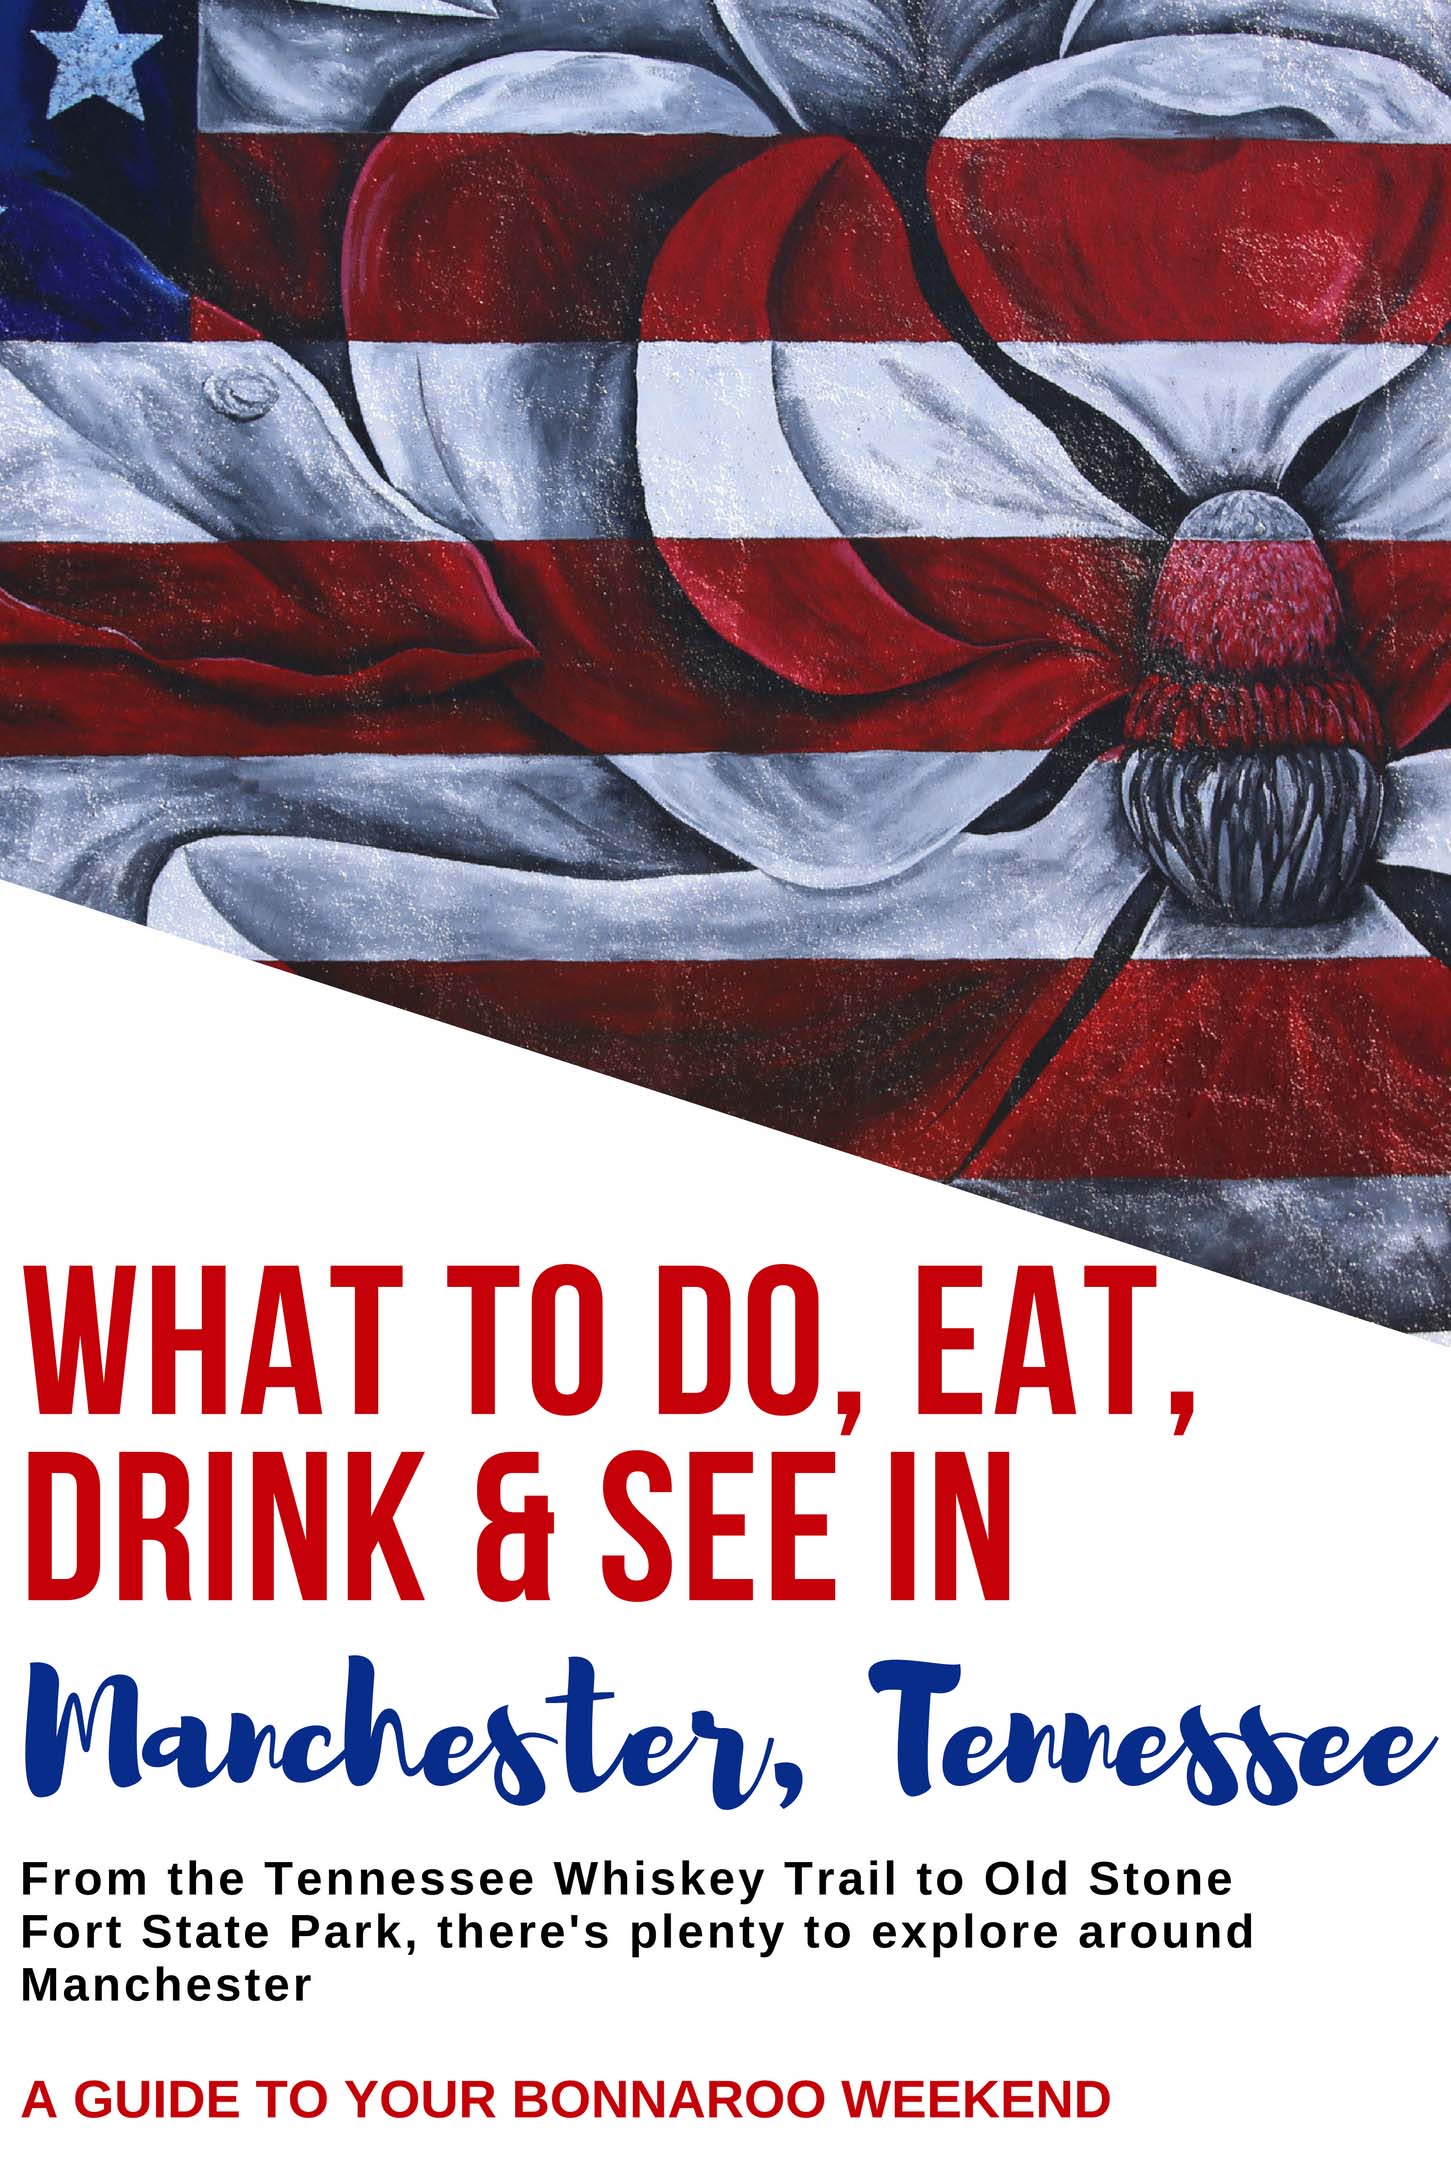 Beyond Bonnaroo: What to Do in Manchester, Tennessee